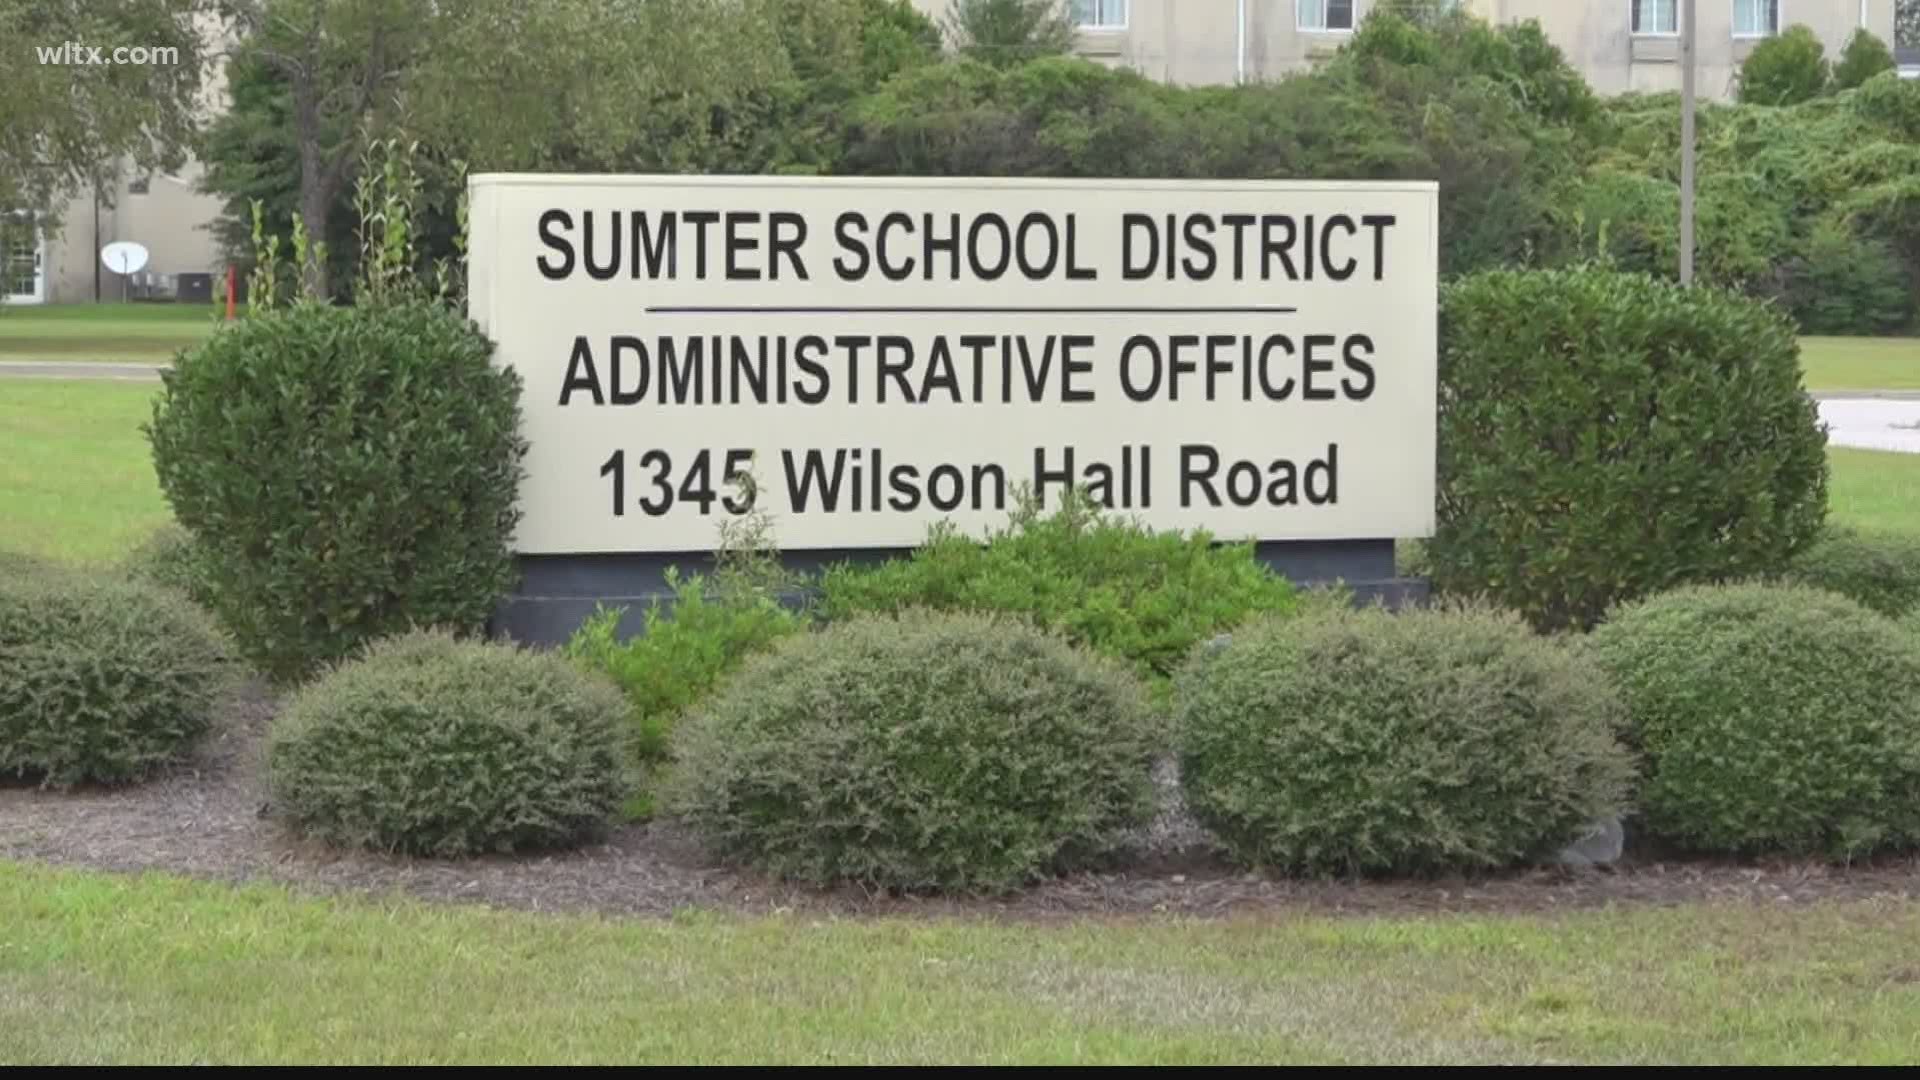 Discussions for a potential transition to face-to-face learning continue in Sumter this week, after the school district decided to start the semester virtually.